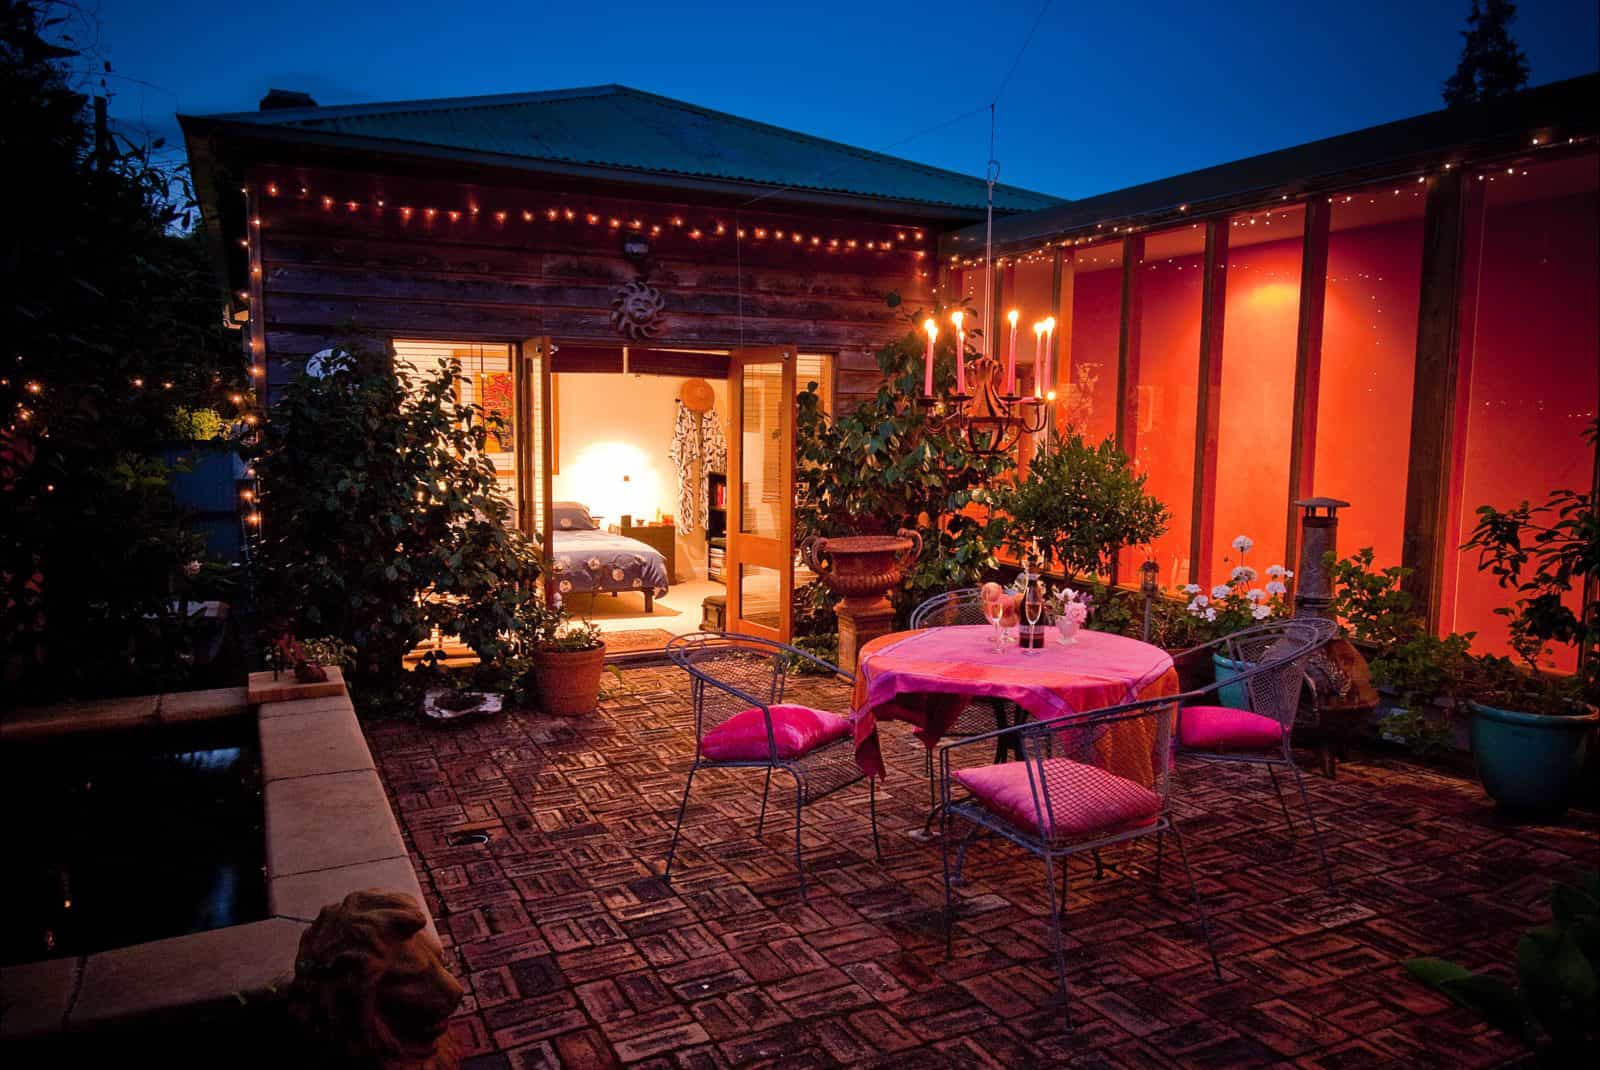 Private courtyard with warm glow of the chandelier and tinkling sounds of the fountain